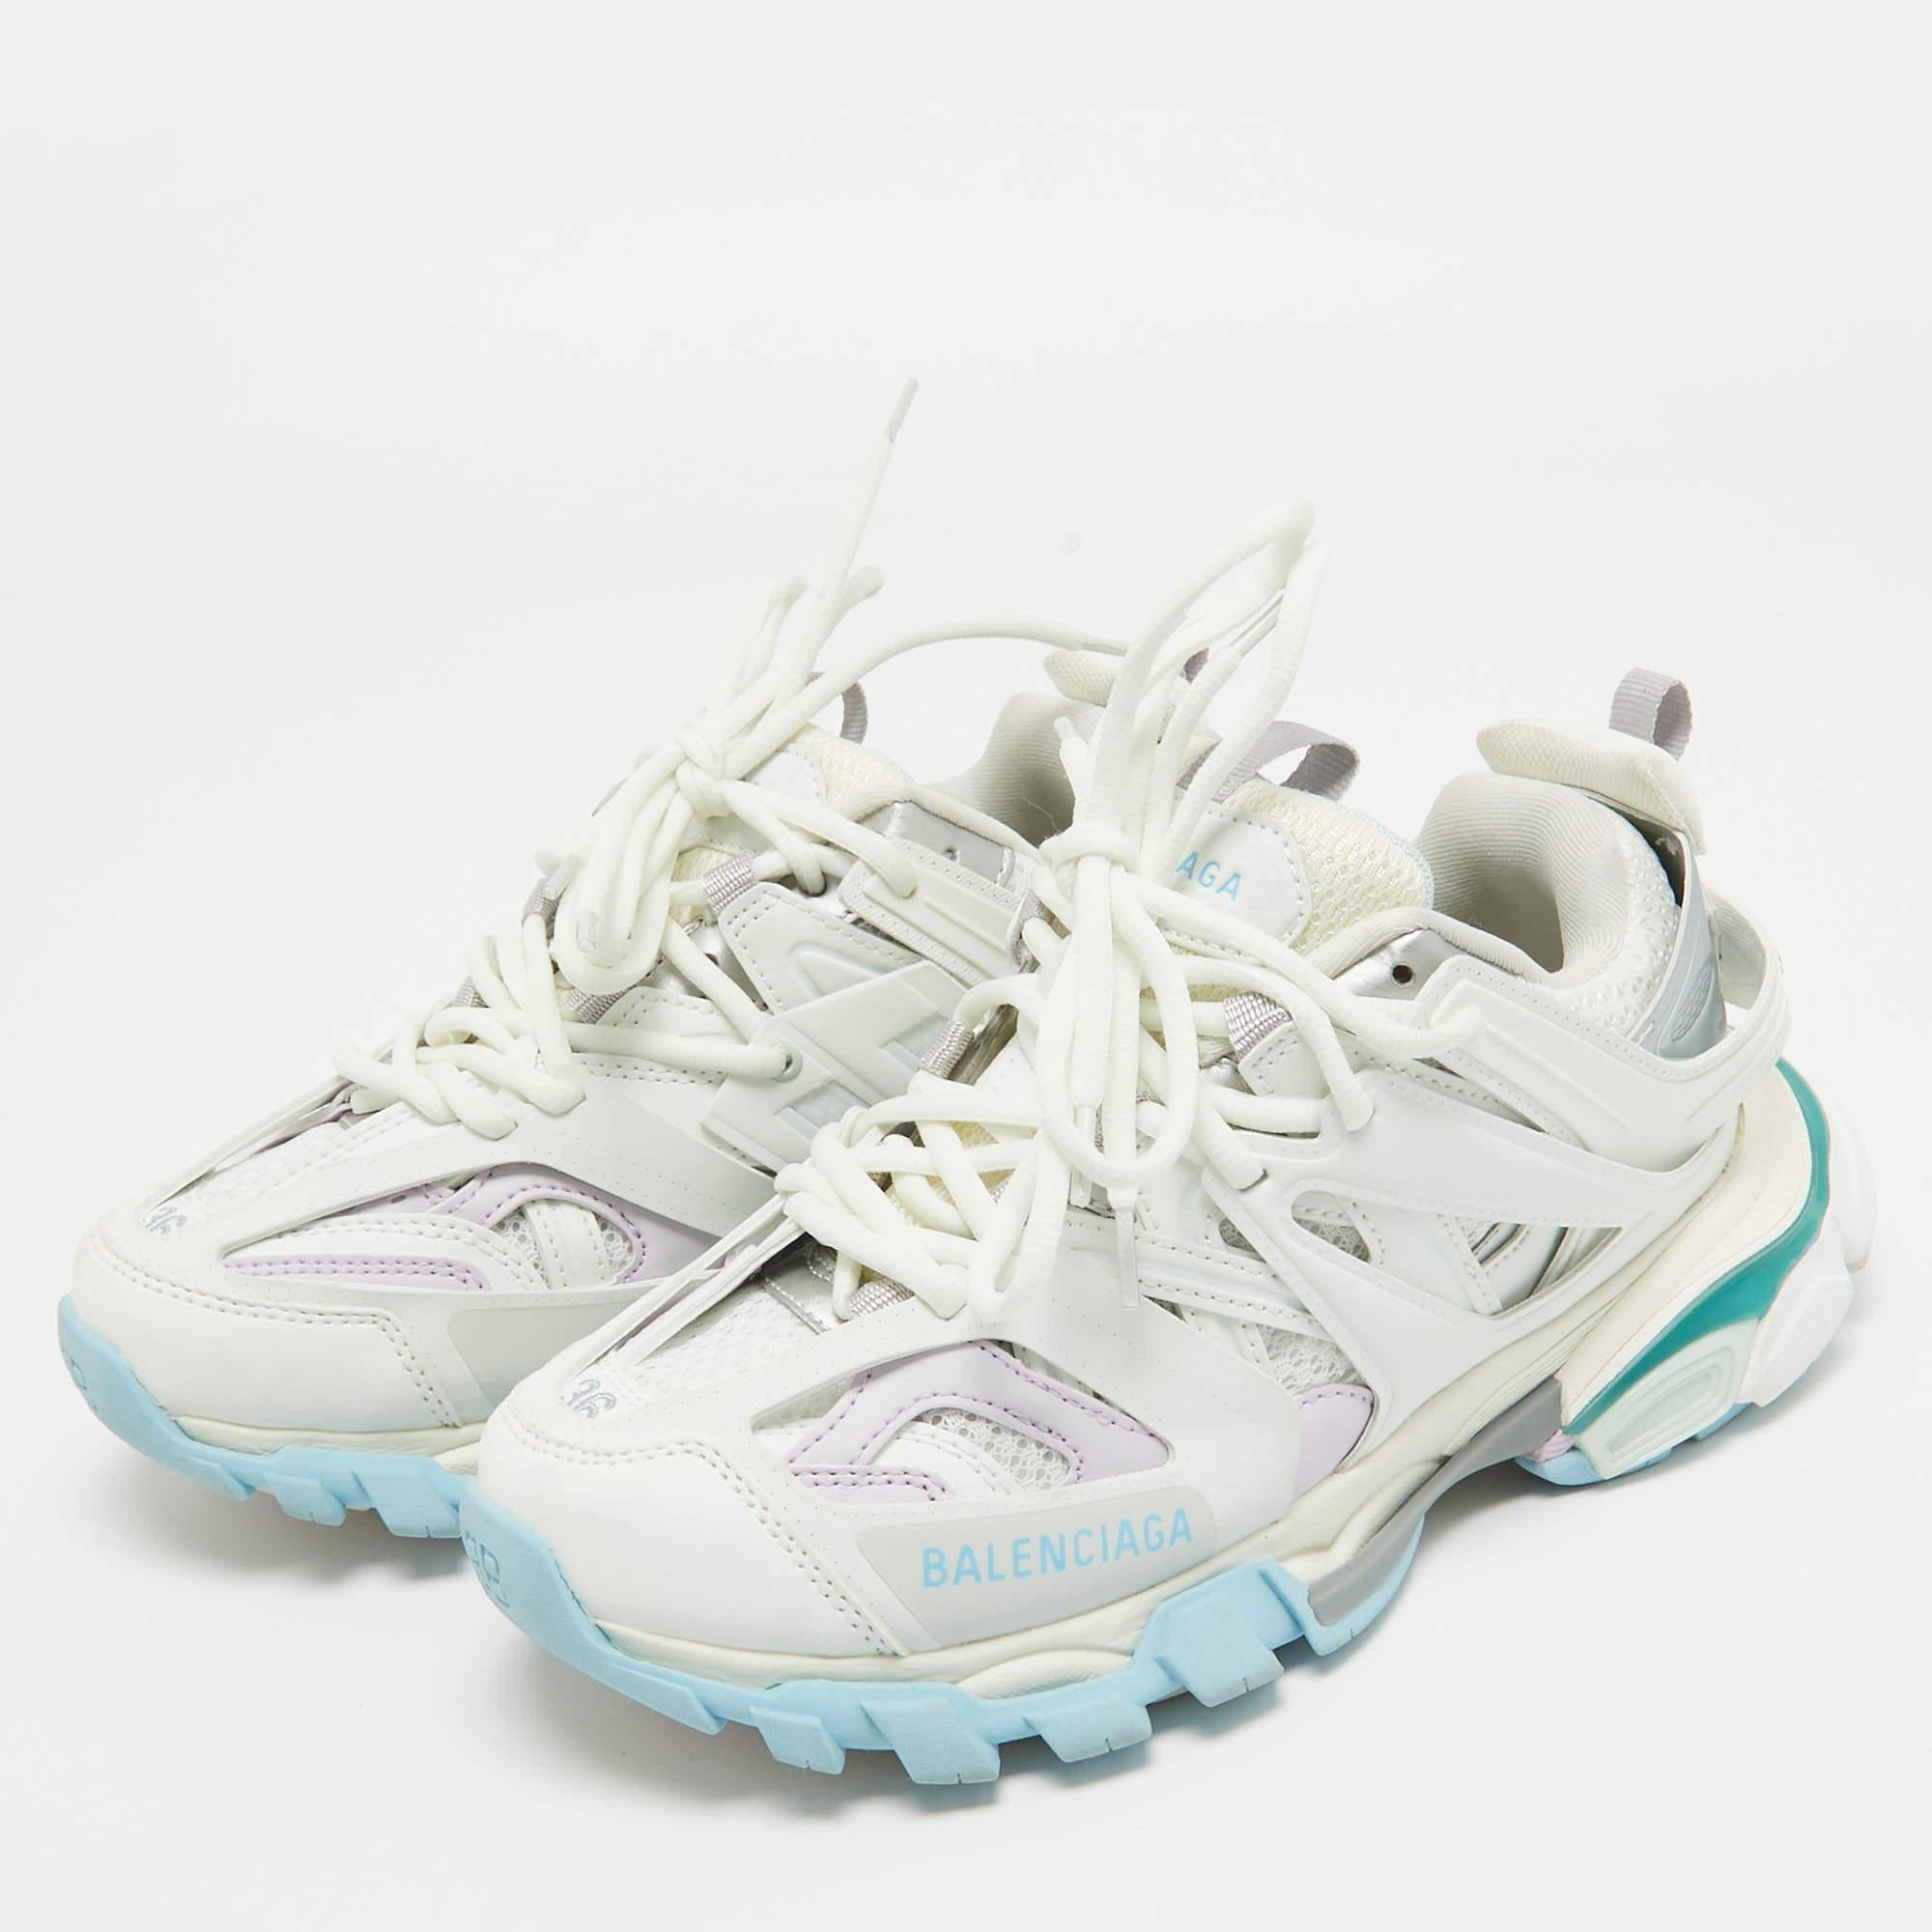 Balenciaga Multicolor Leather and Mesh Track Sneakers Size 36 For Sale 2